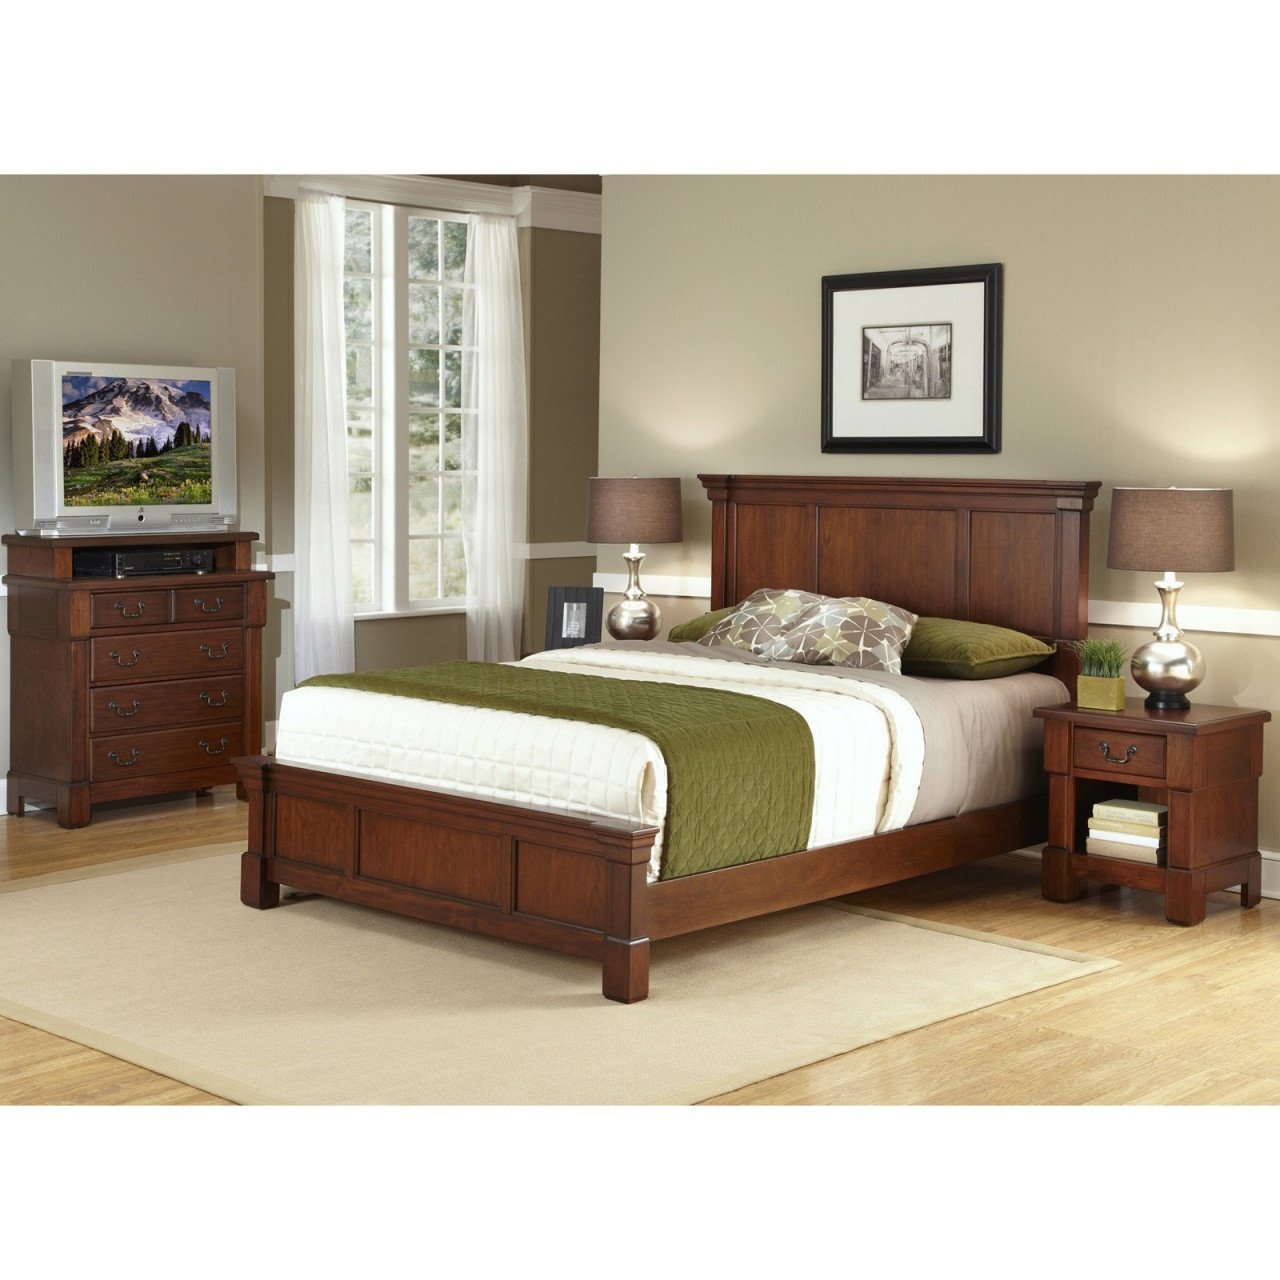 Sofia Vergara Bedroom Set Lovely Ideas for A Small Bedroom Layout – the New Daily Nation From